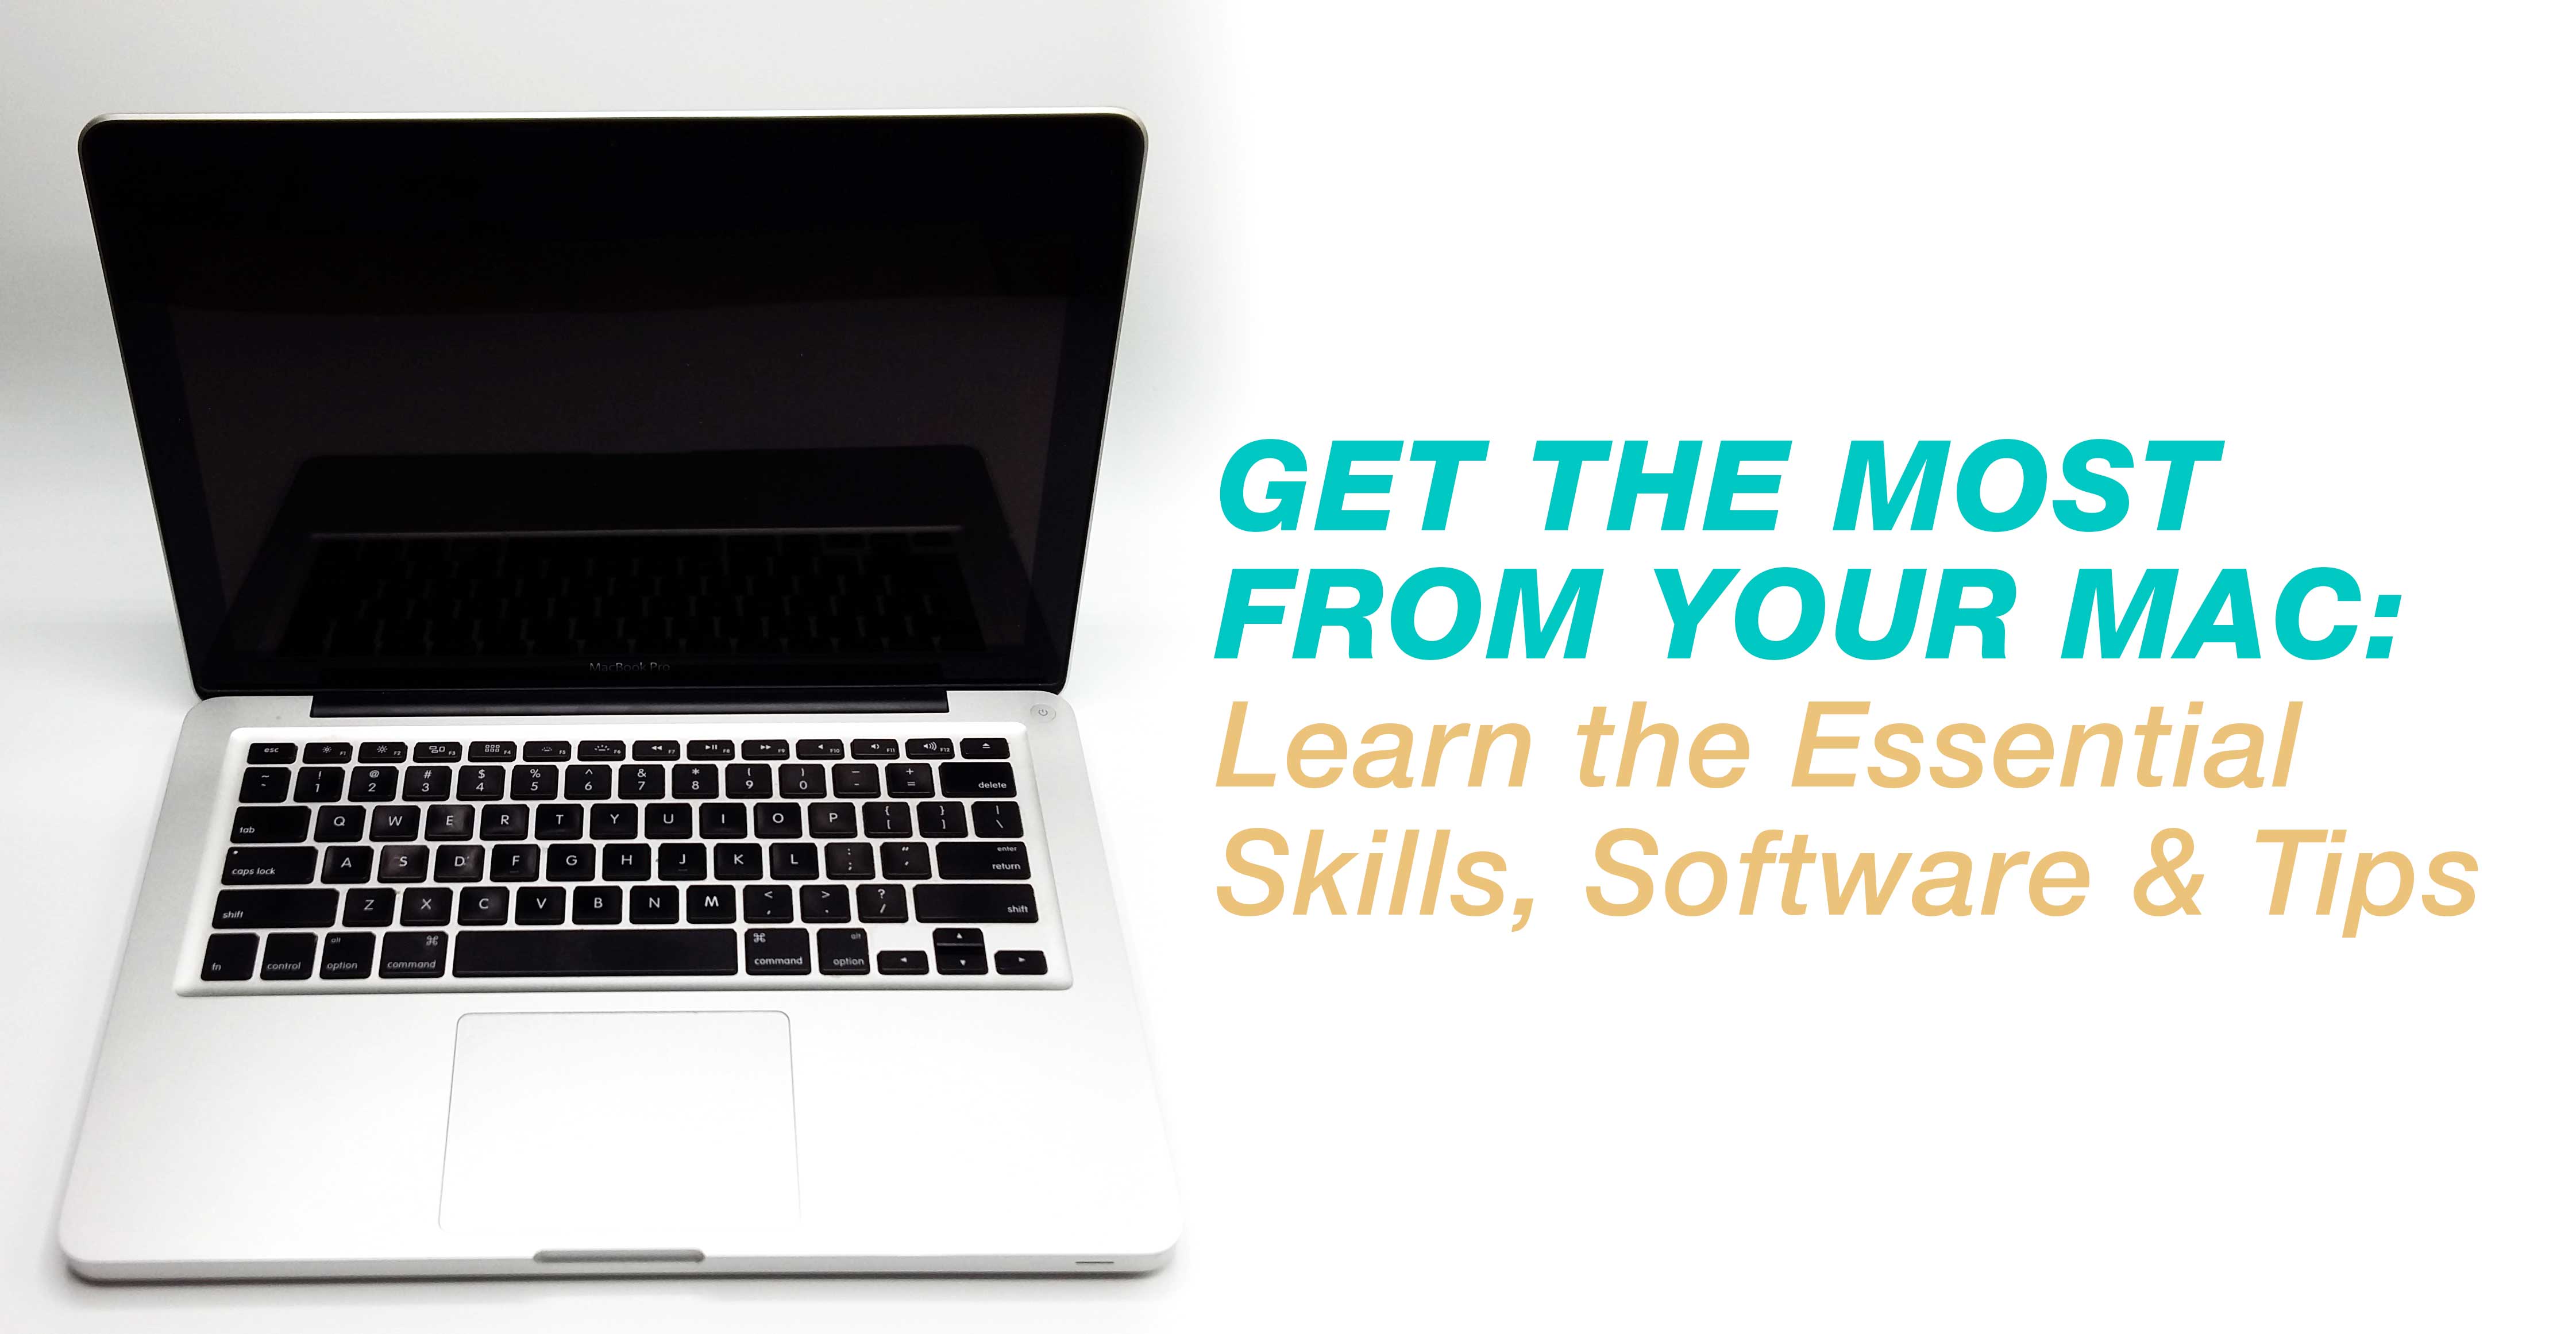 Get the Most from Your Mac – Learn the Essential Skills, Software & Tips